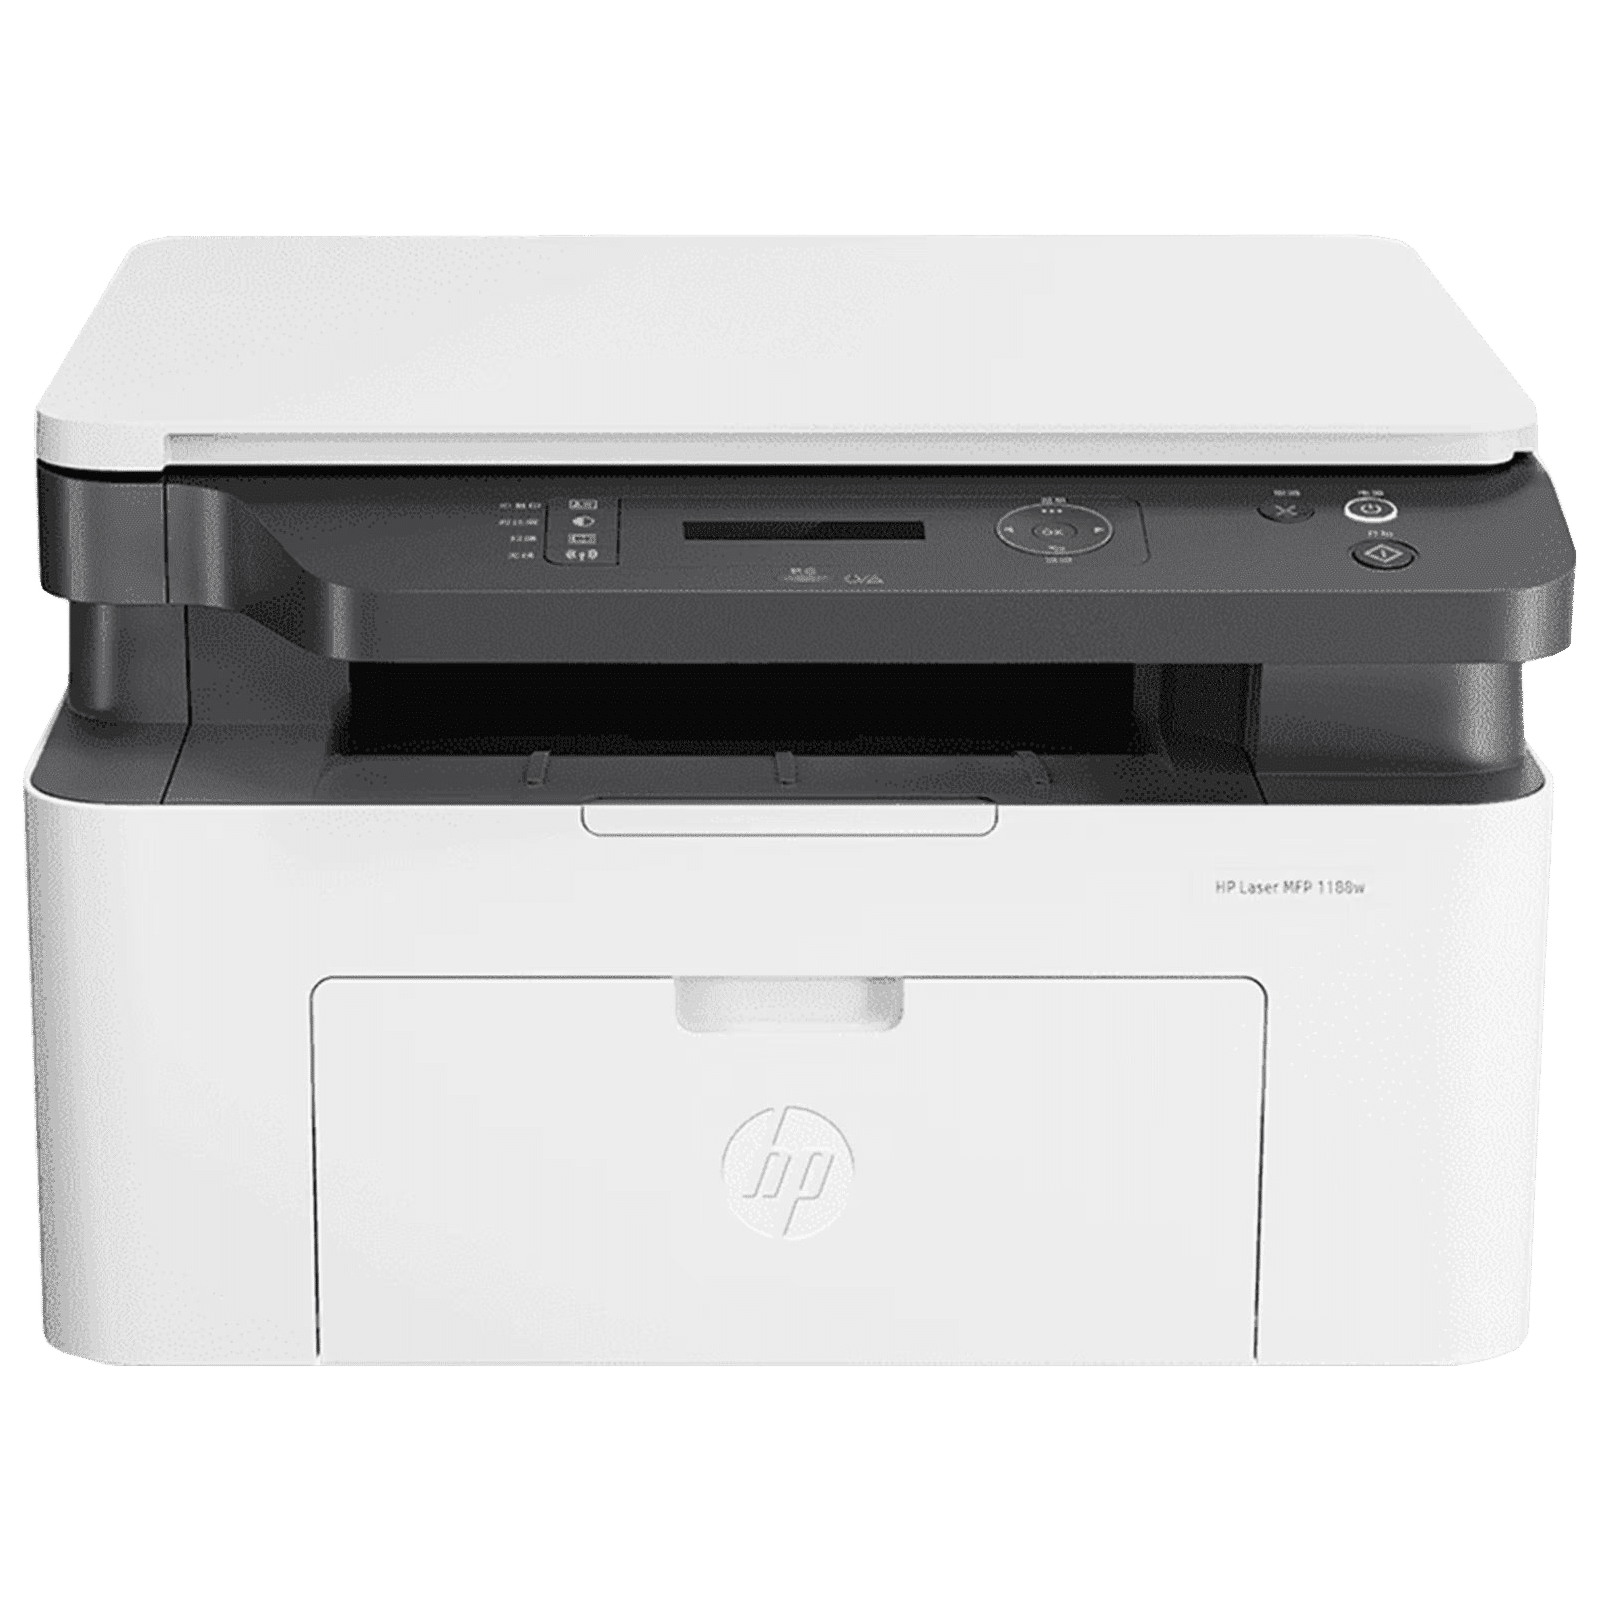 Buy HP Laser MFP 1188w Wireless Black and White All-in-One Laserjet Printer (Manual Duplex Printing, 715A3A, White) Online - Croma